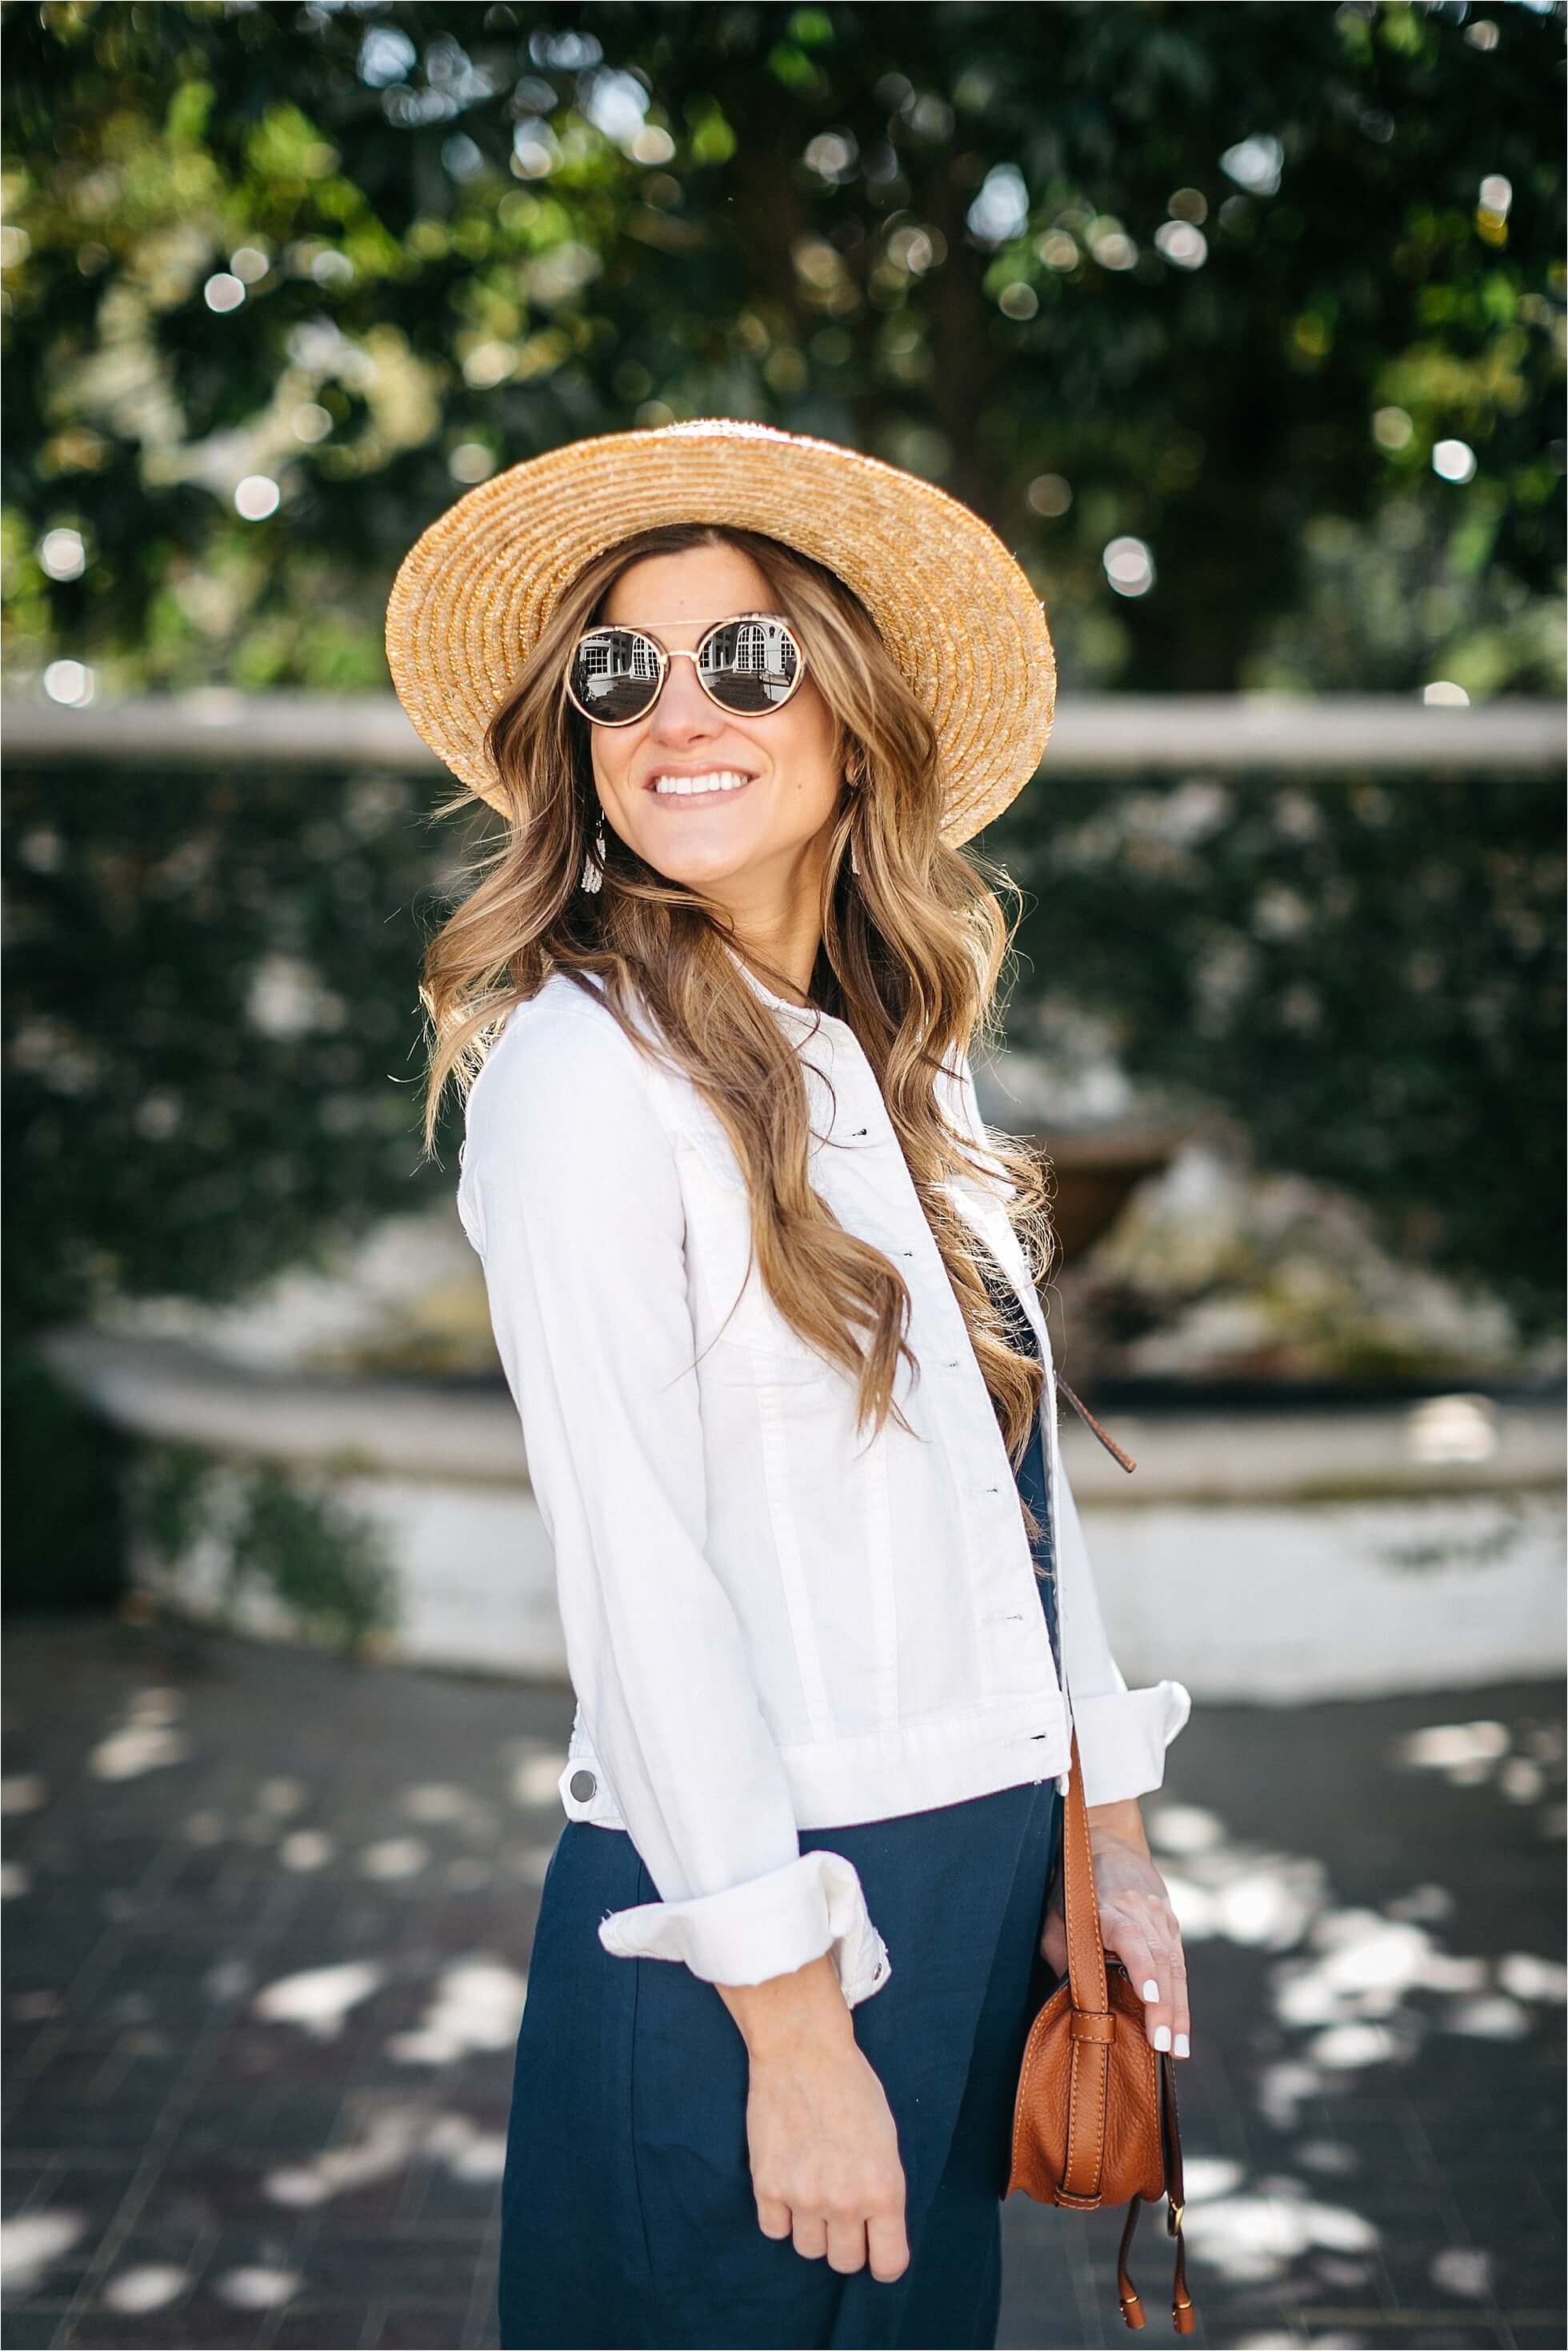 how to style a slip dress, boater hat, chloe drew bag, spring outfit, sonix sunglasses